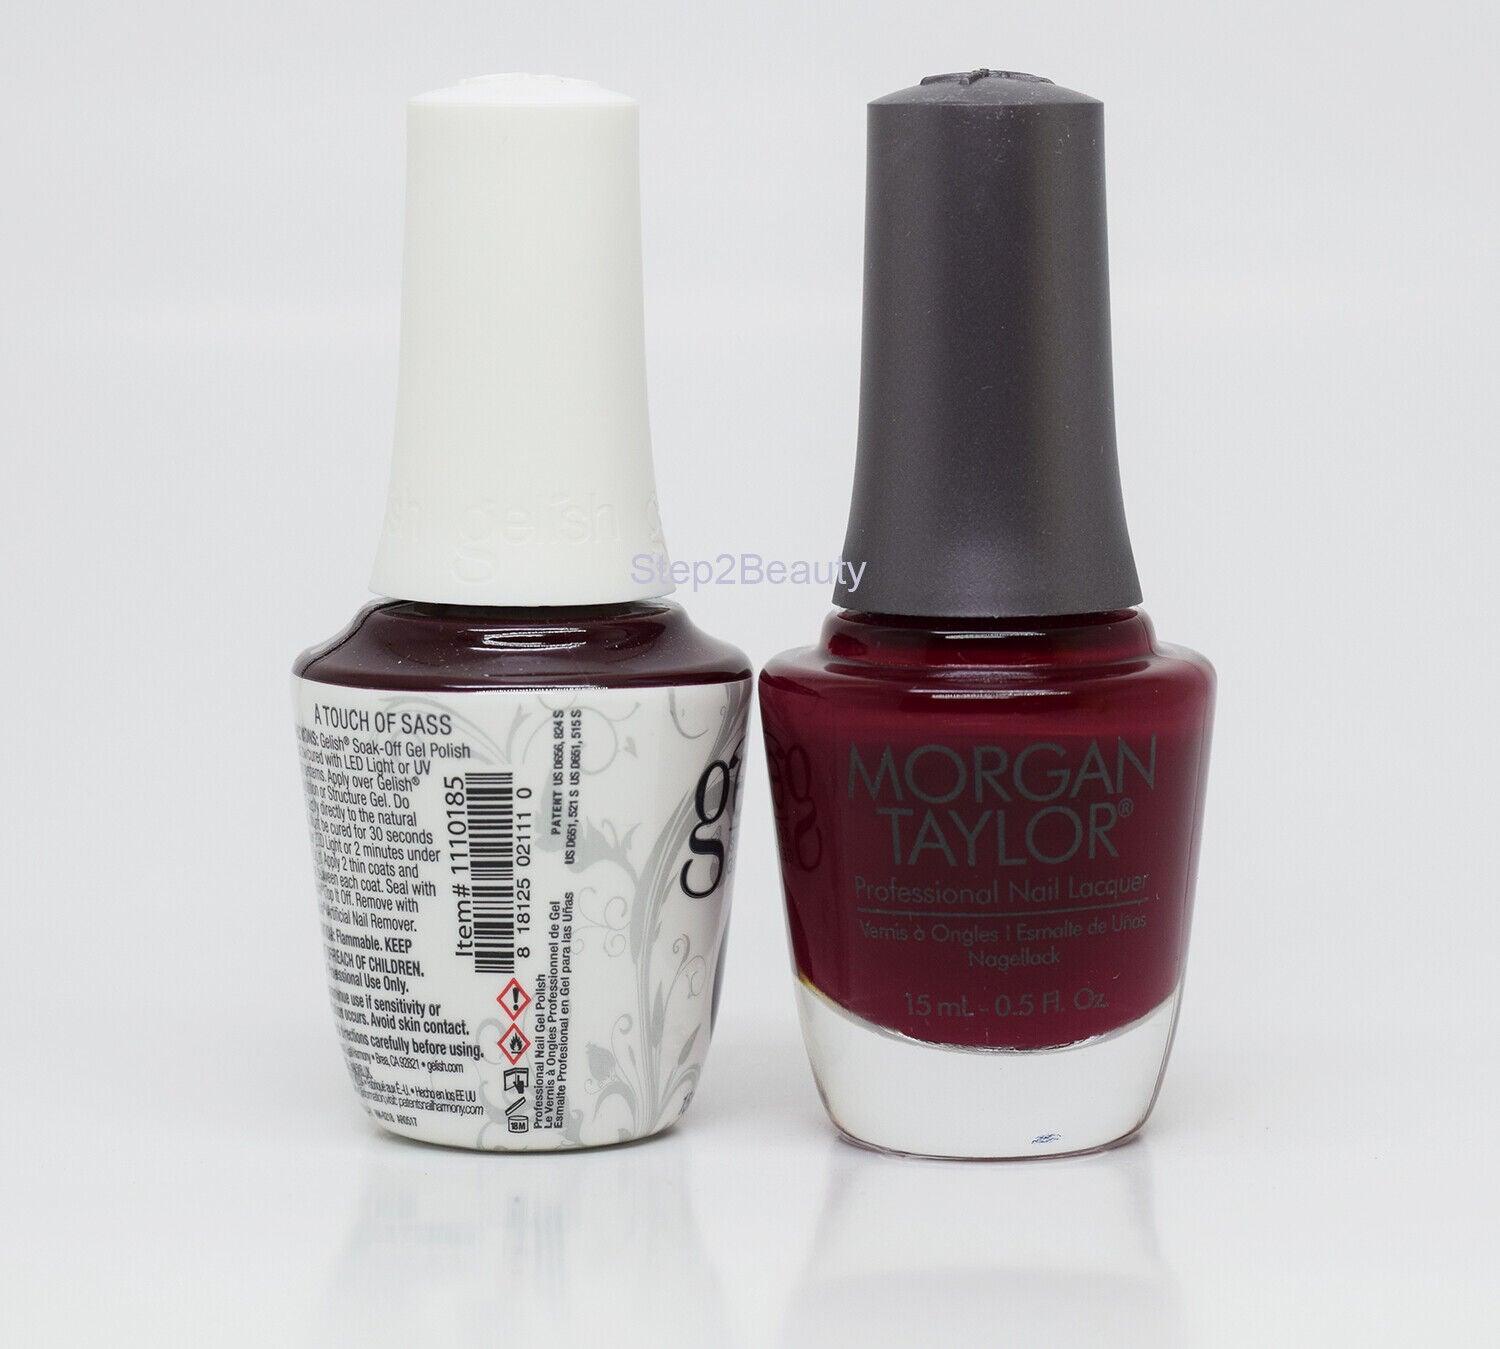 Gelish DUO Soak Off Gel Polish + Morgan Taylor Lacquer - #185 A Touch of Sass